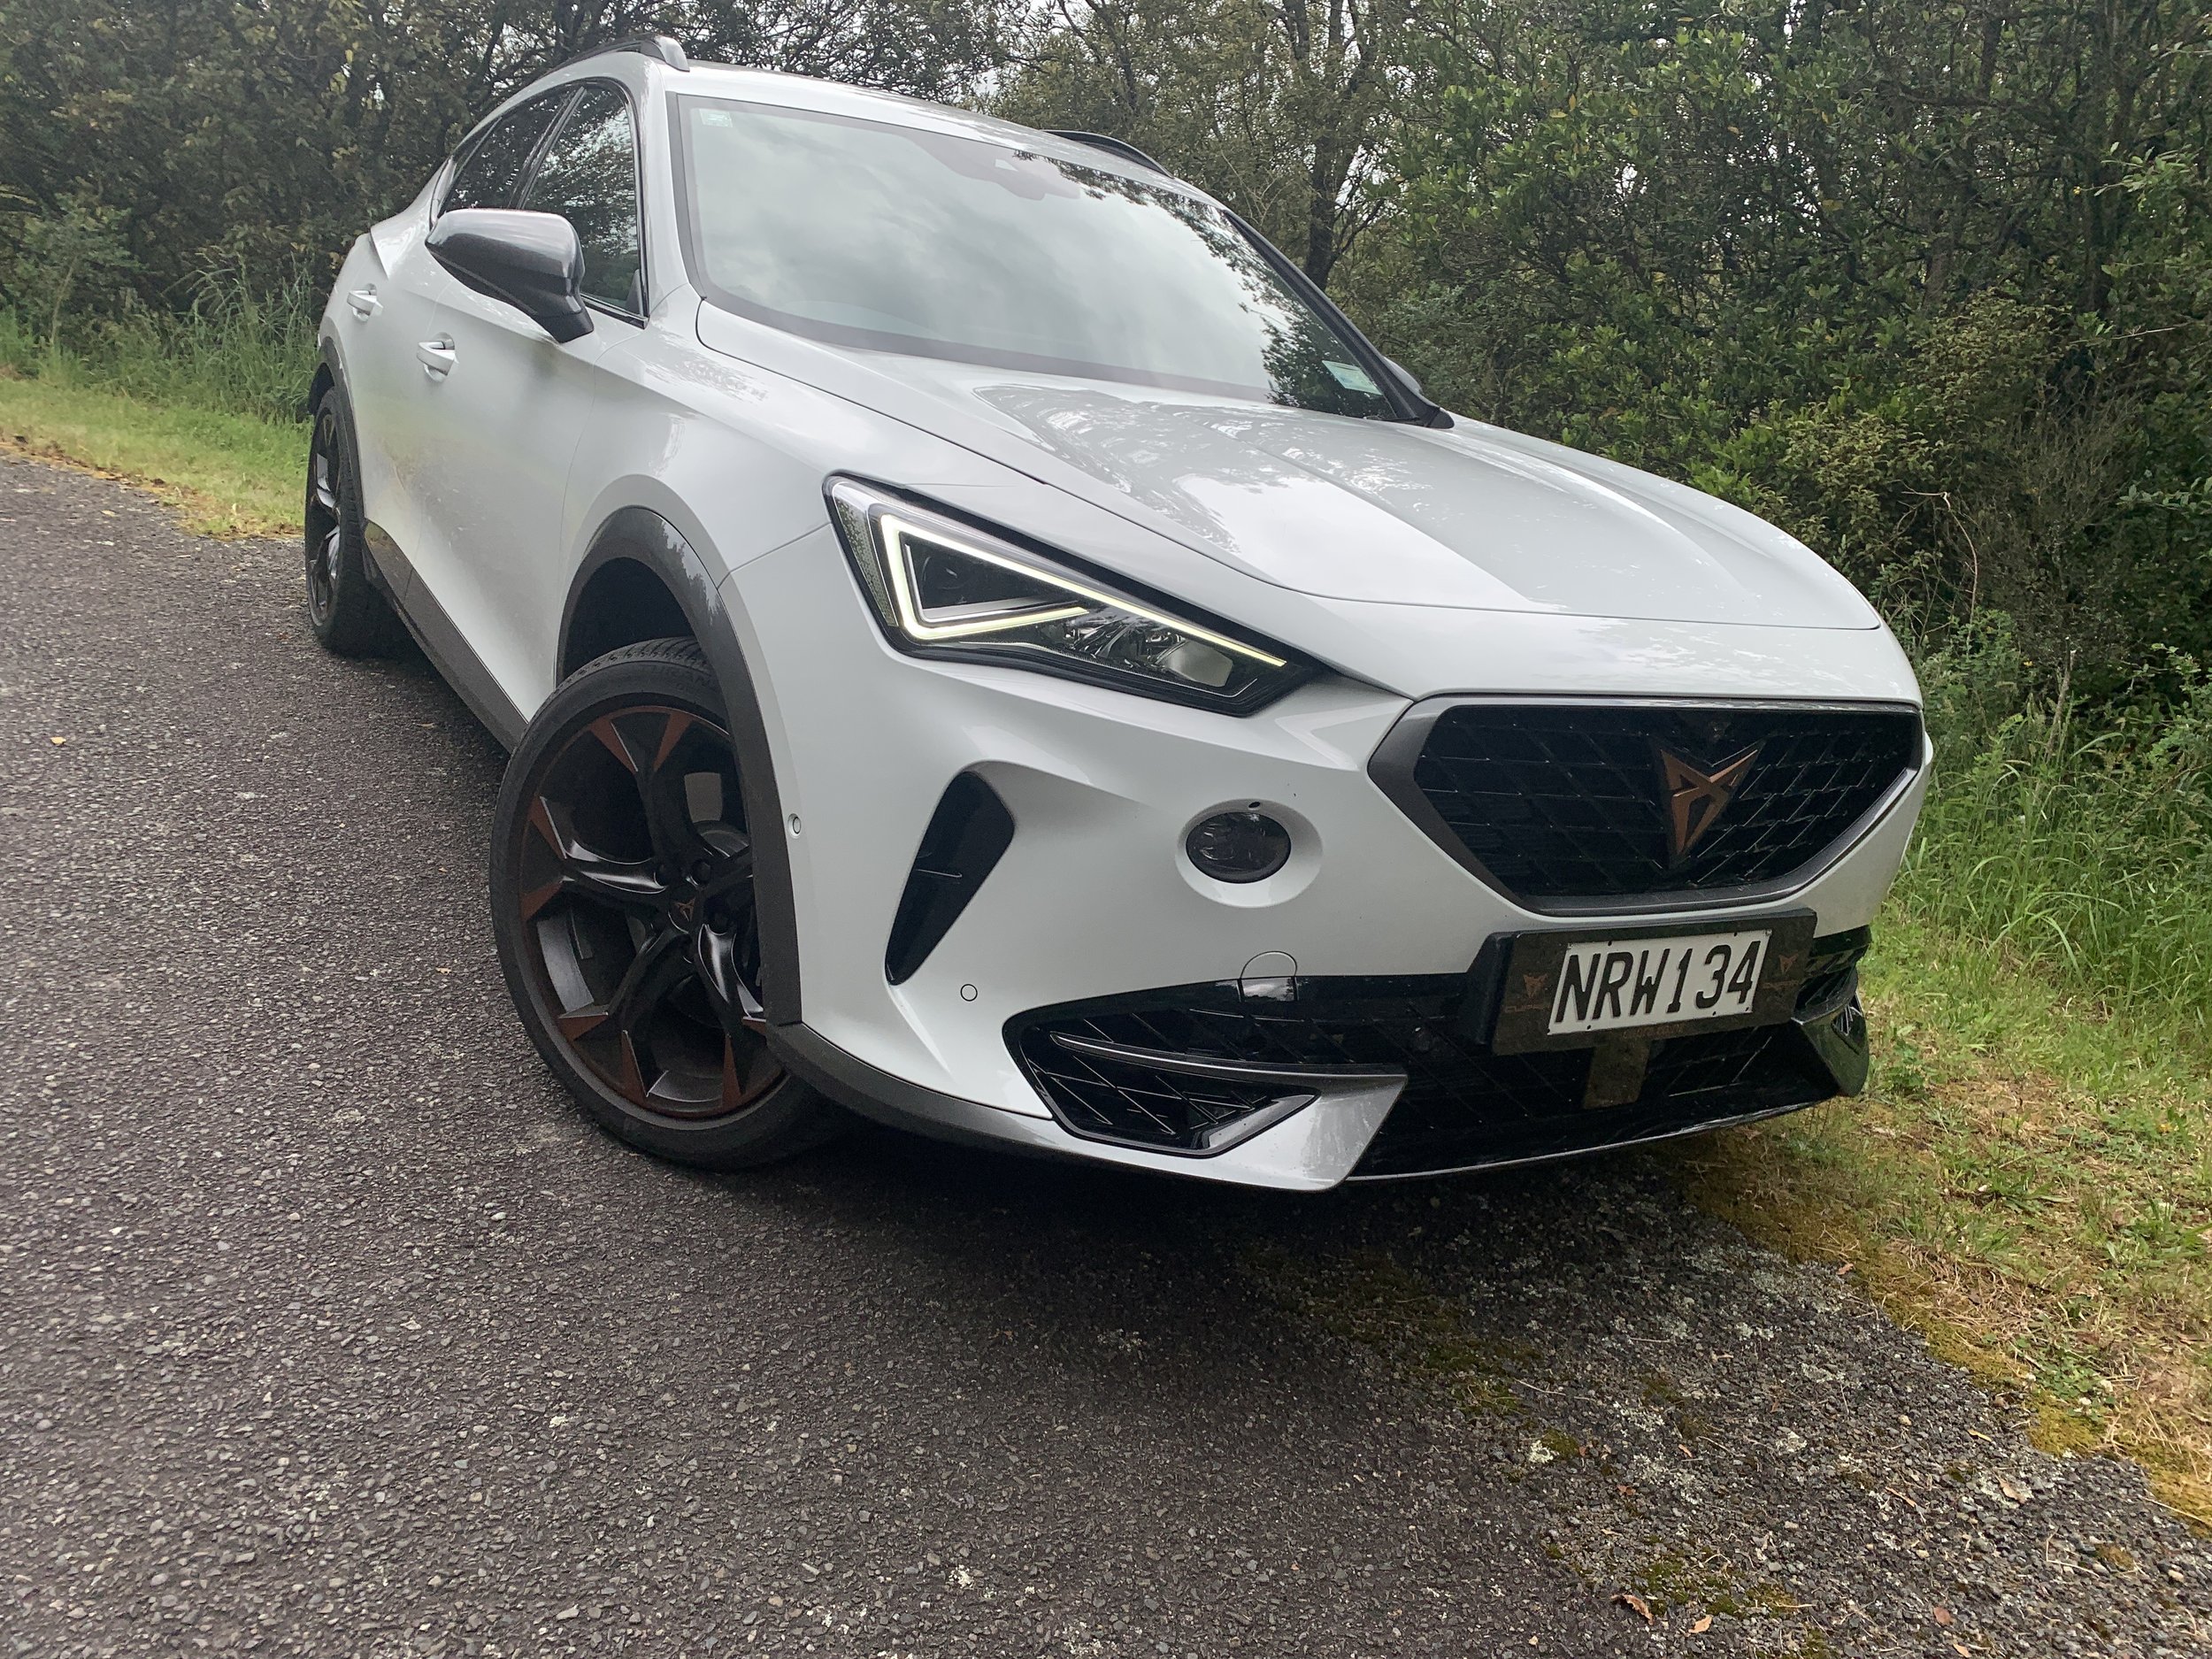 ROAD TEST: 2022 Cupra Formentor review 